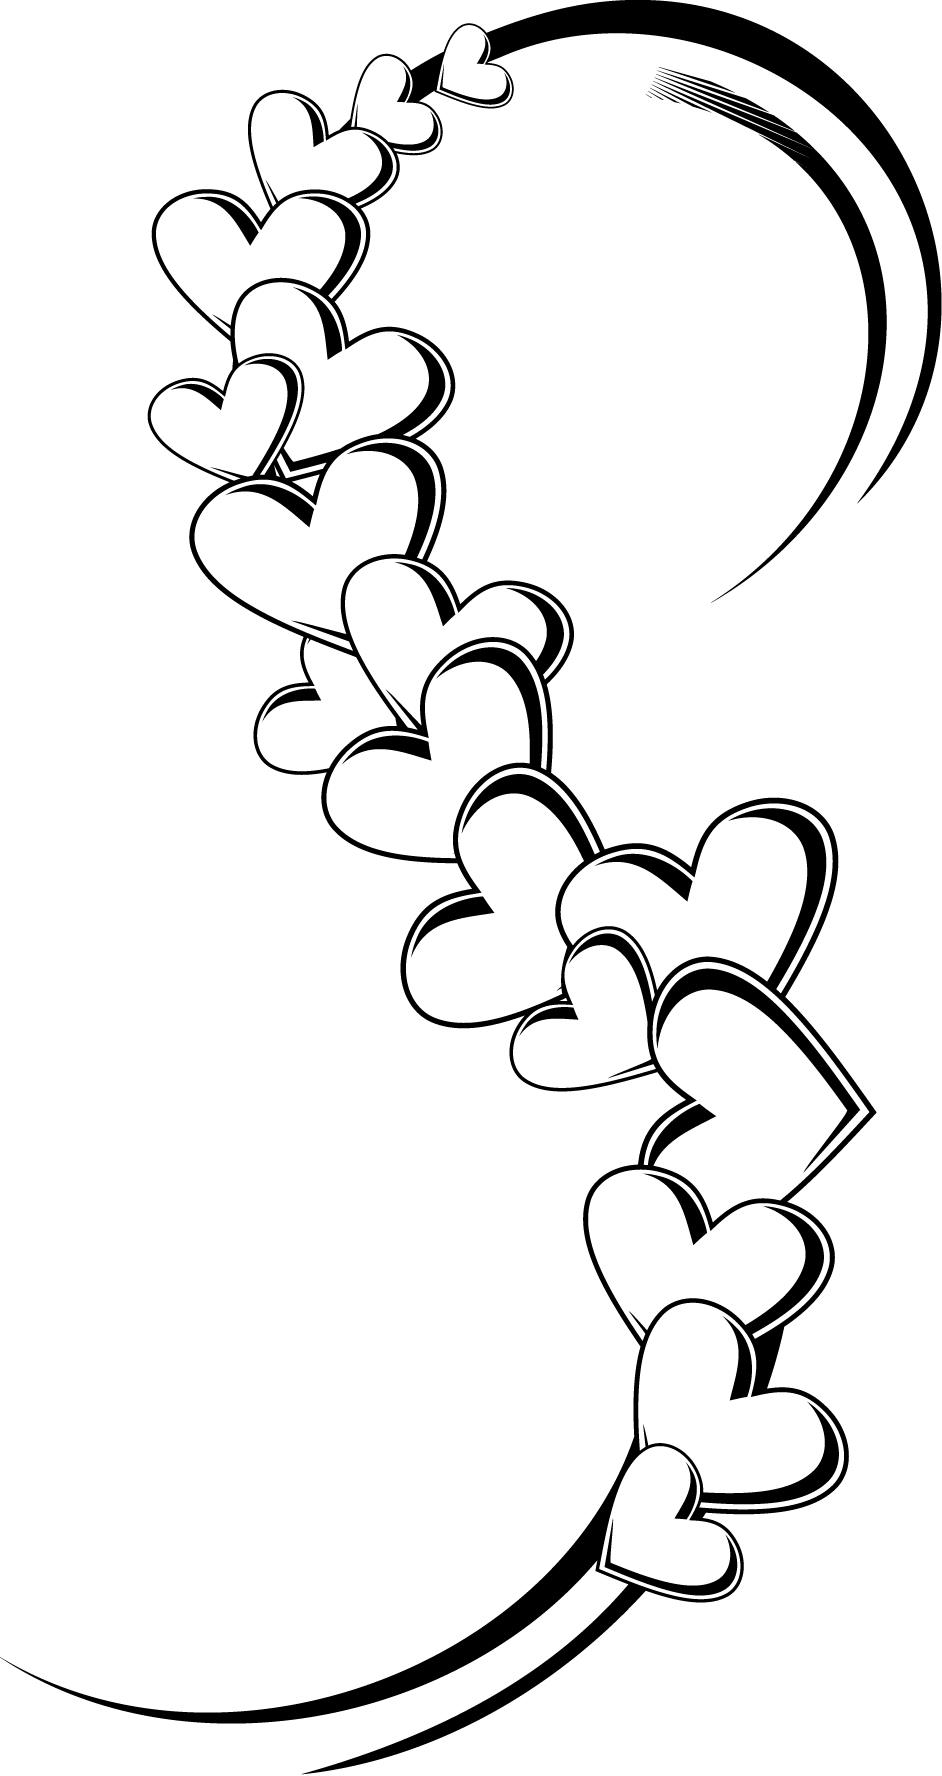 Tattoo Drawings Of Hearts - ClipArt Best